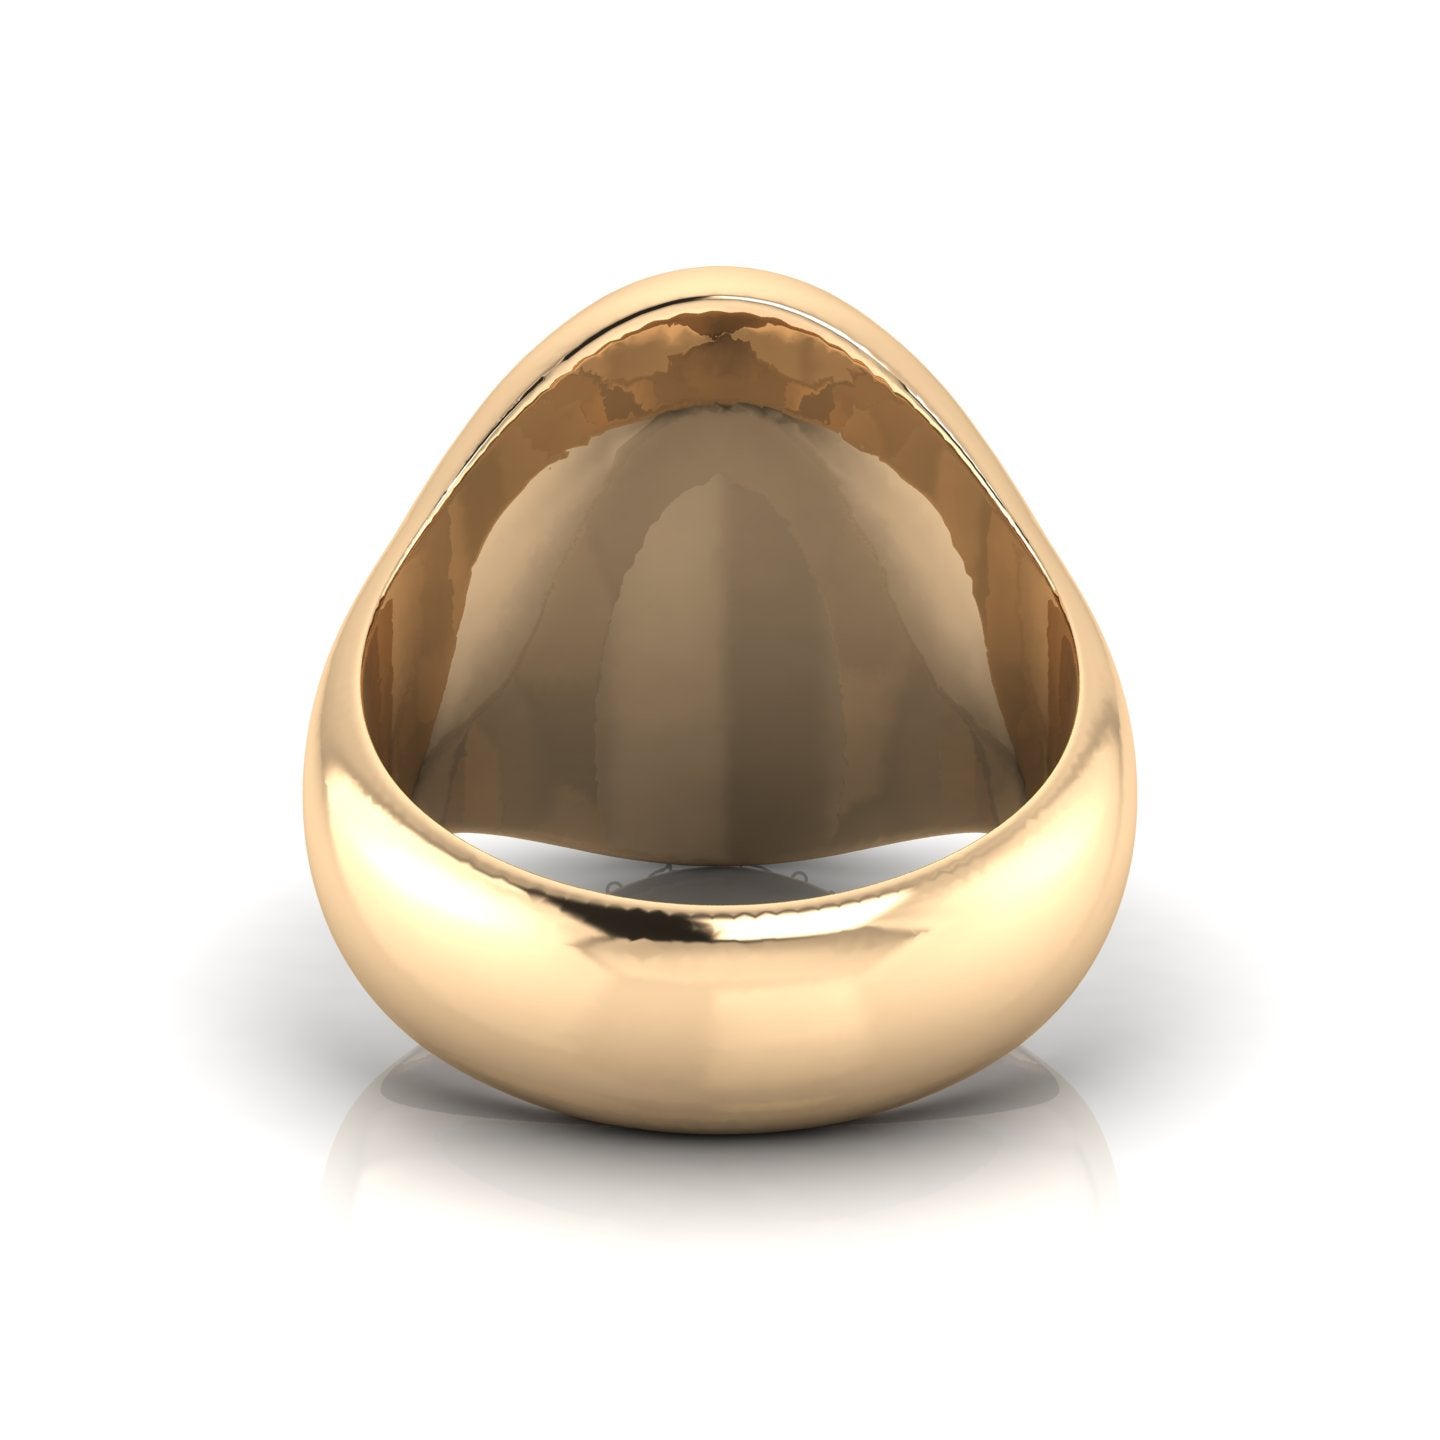 A back view of an Elon University Meta Class Ring made of 14kt yellow gold. The class ring features the Elon University logo in a raised, polished finish.